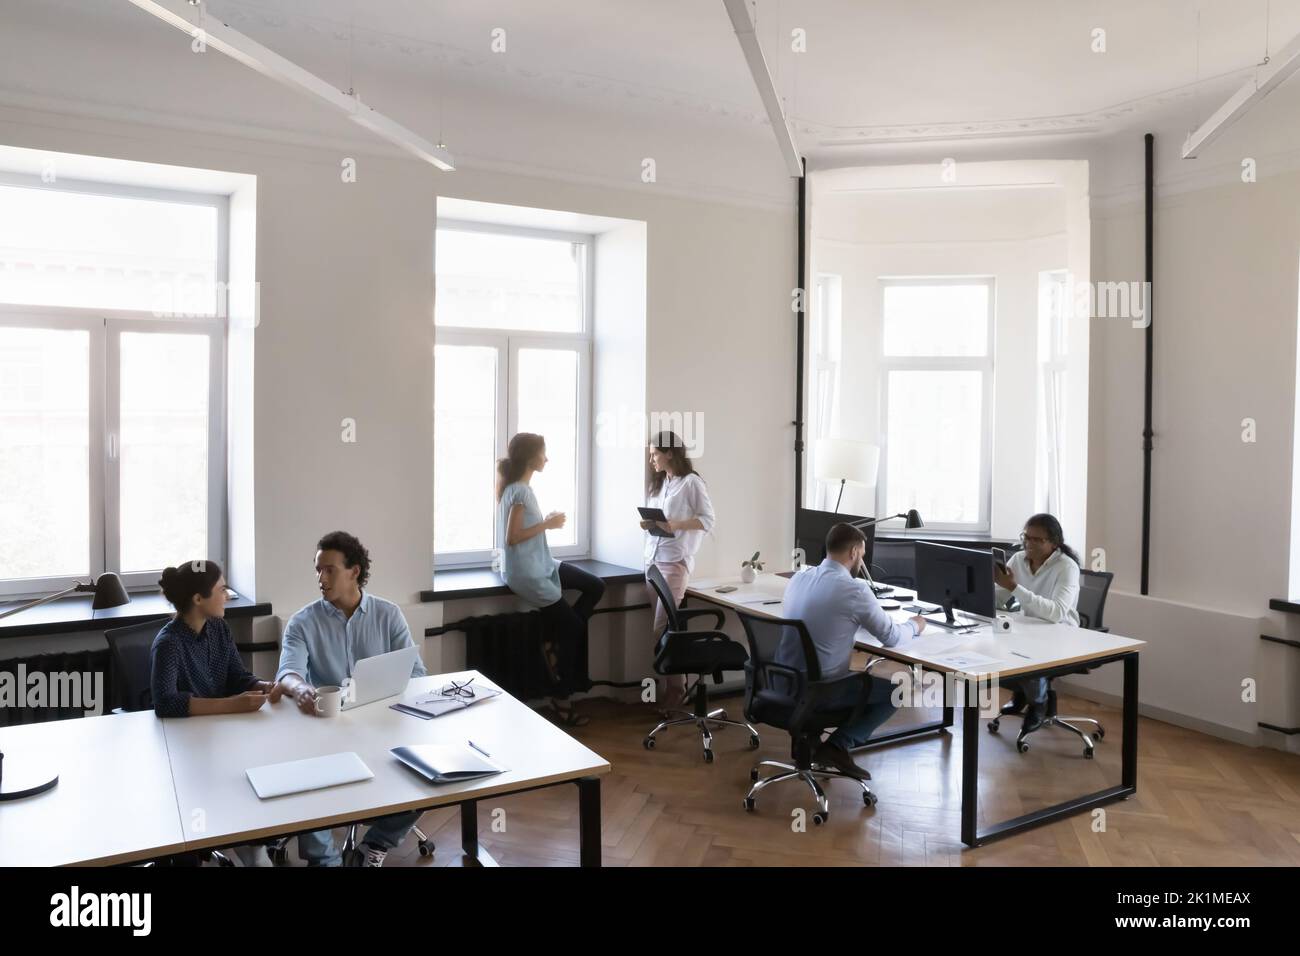 Contemporary loft office space with multiethnic business team Stock Photo